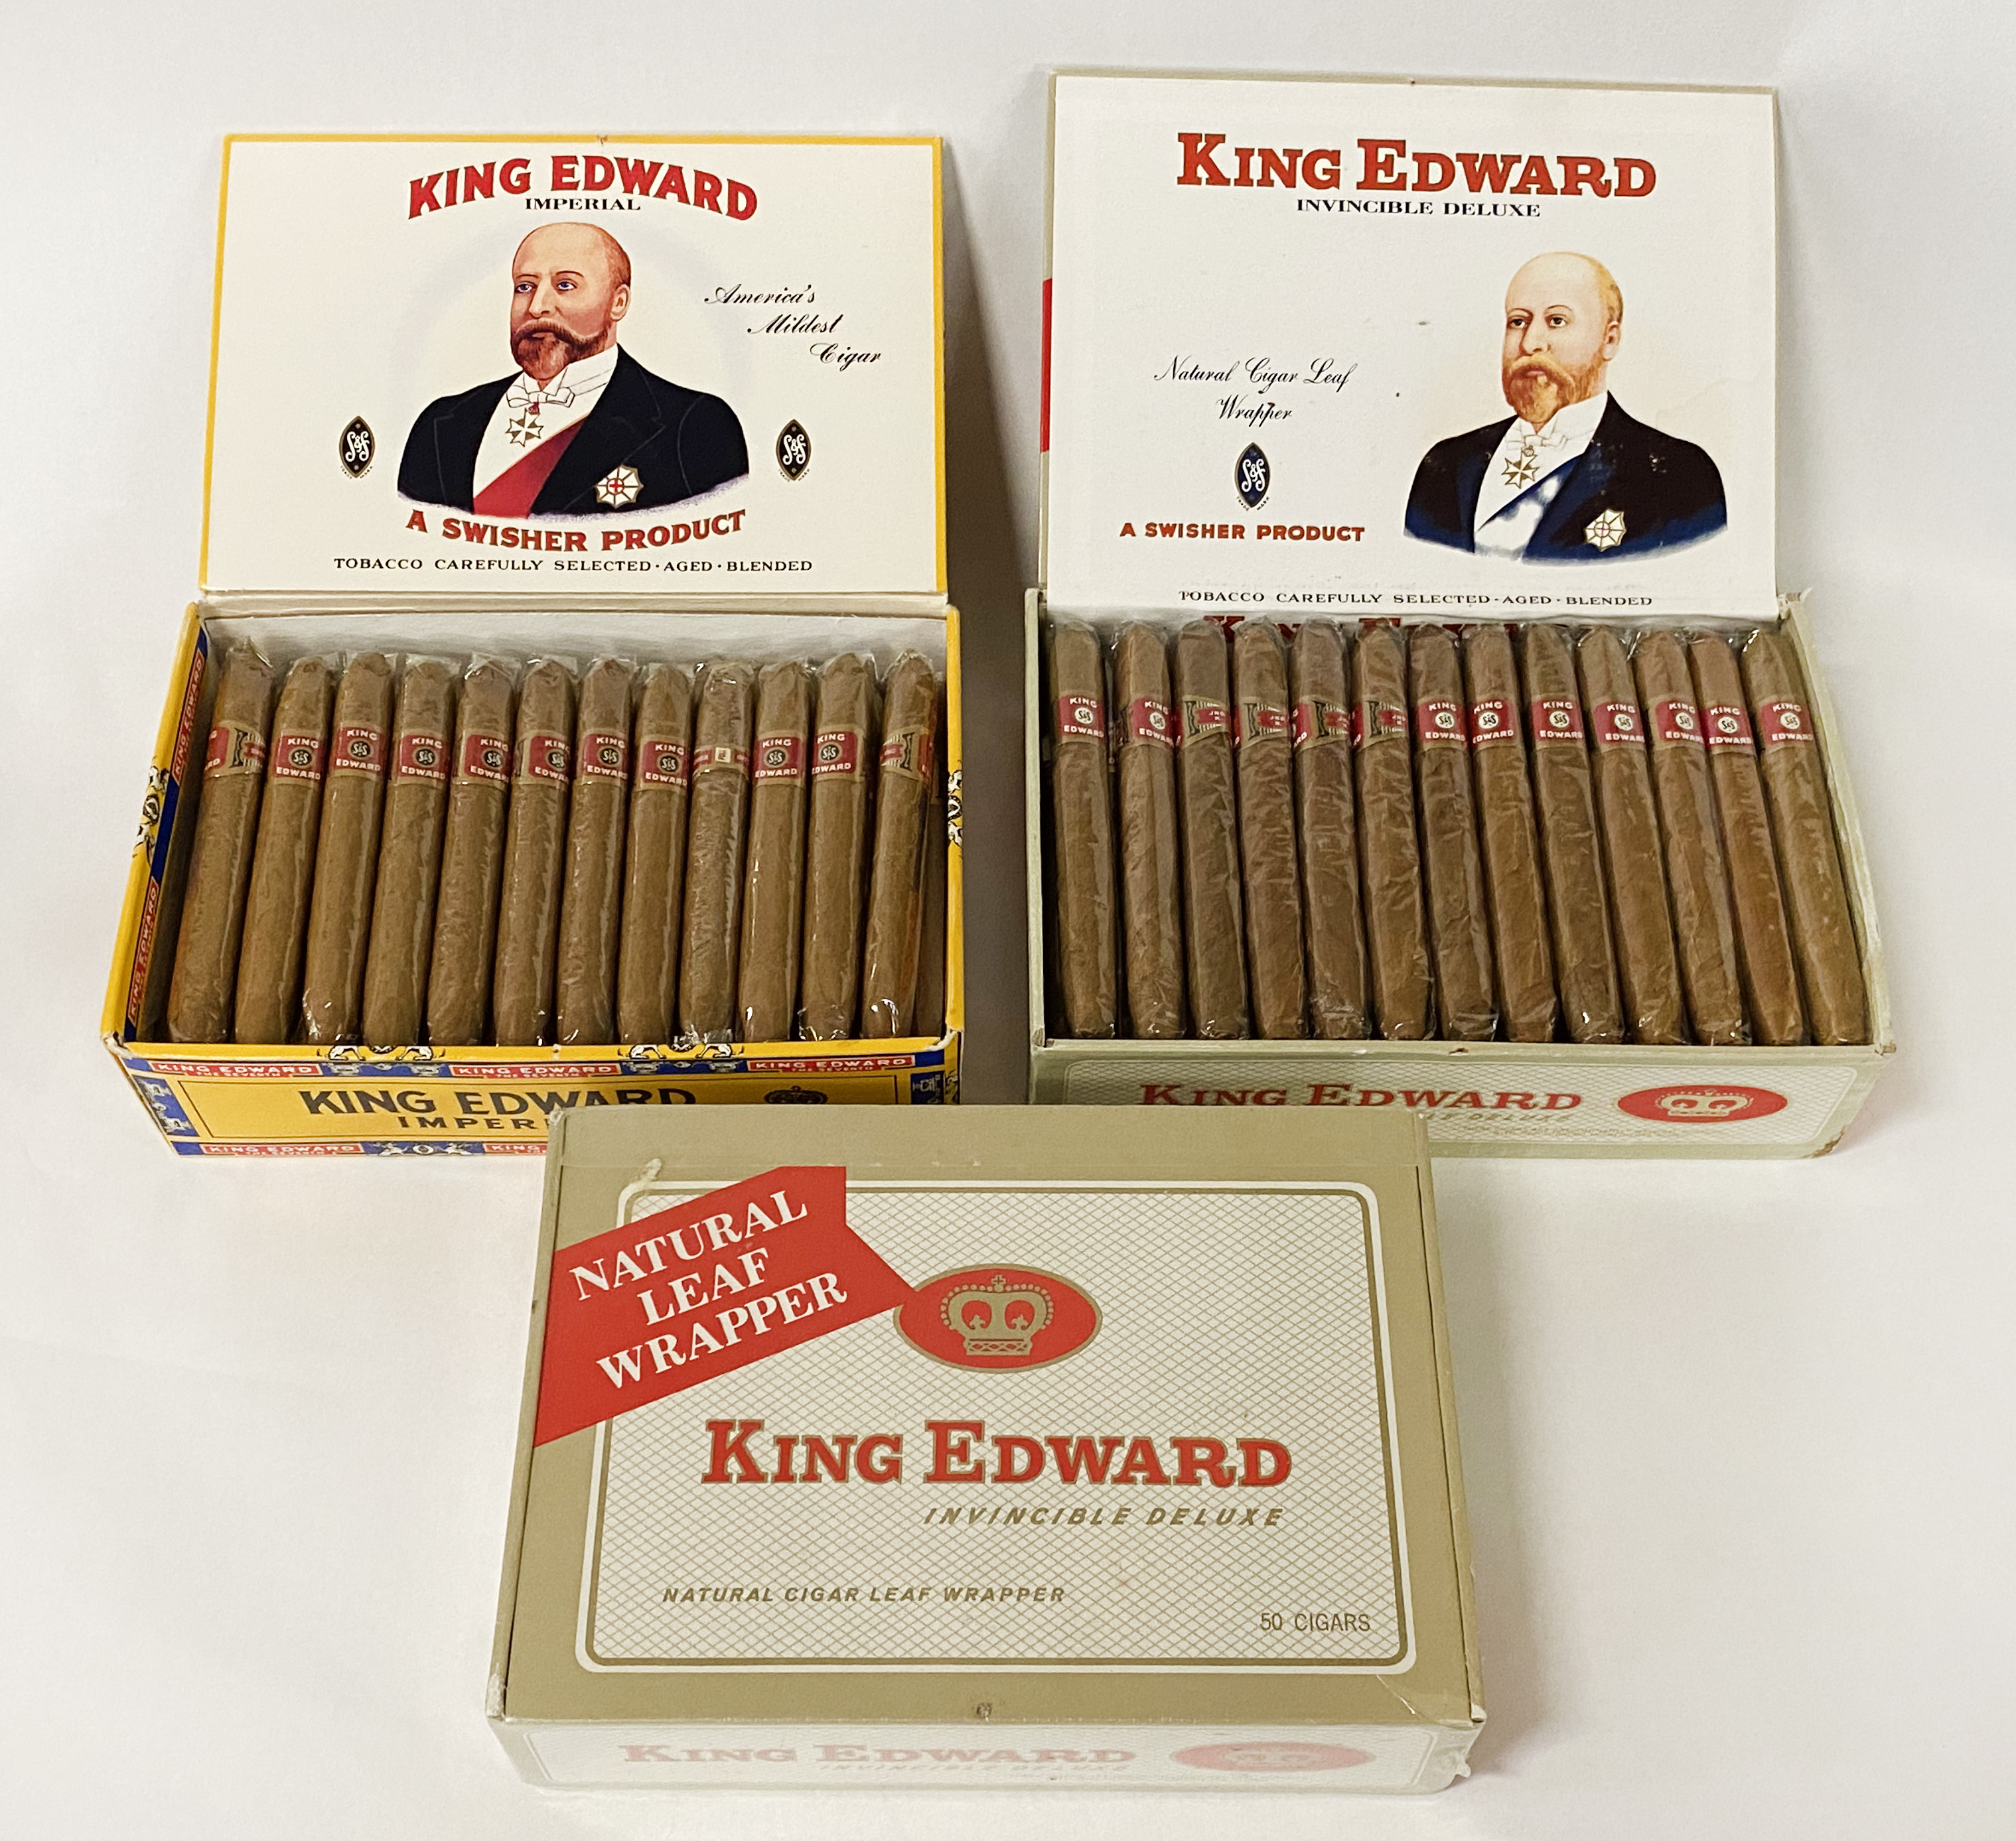 3 FULL BOXES OF KING EDWARD CIGARS: 2 ARE INVINCIBLE DELUXE OF WHICH 1 BOX IS SEALED & ANOTHER BOX